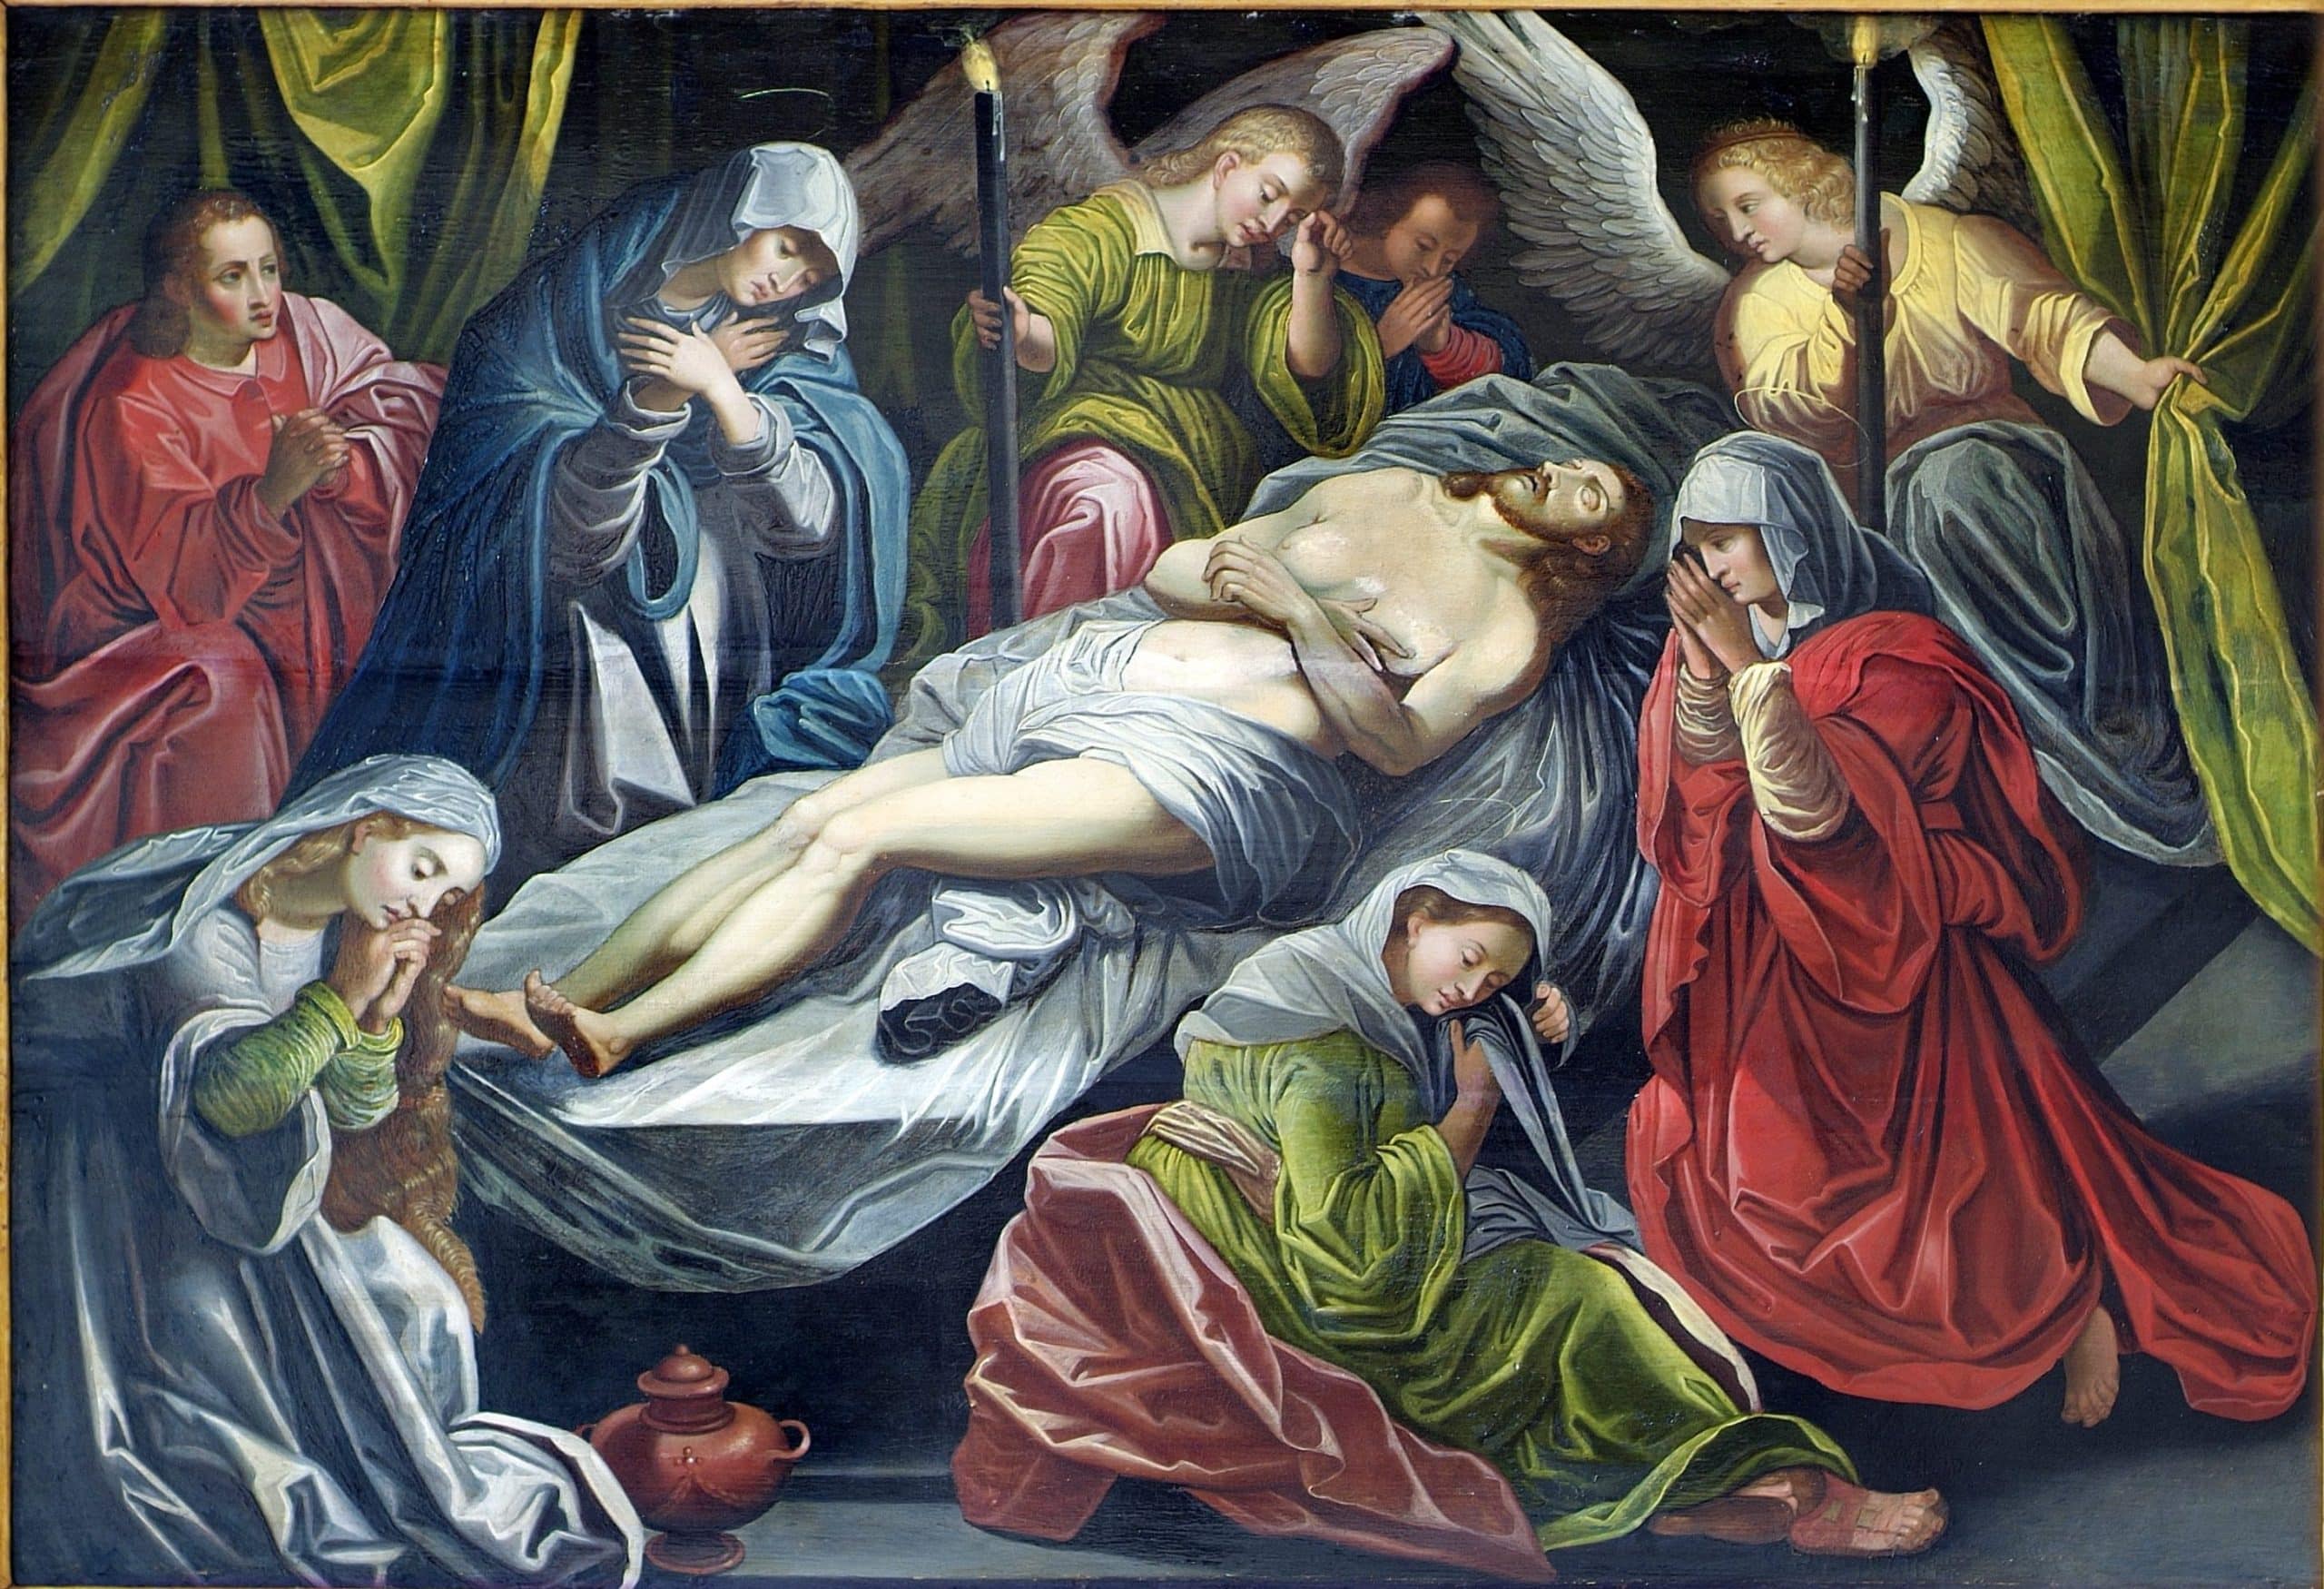 A painting showing figures lamenting the death of Christ. Christ's body is laid on a table.